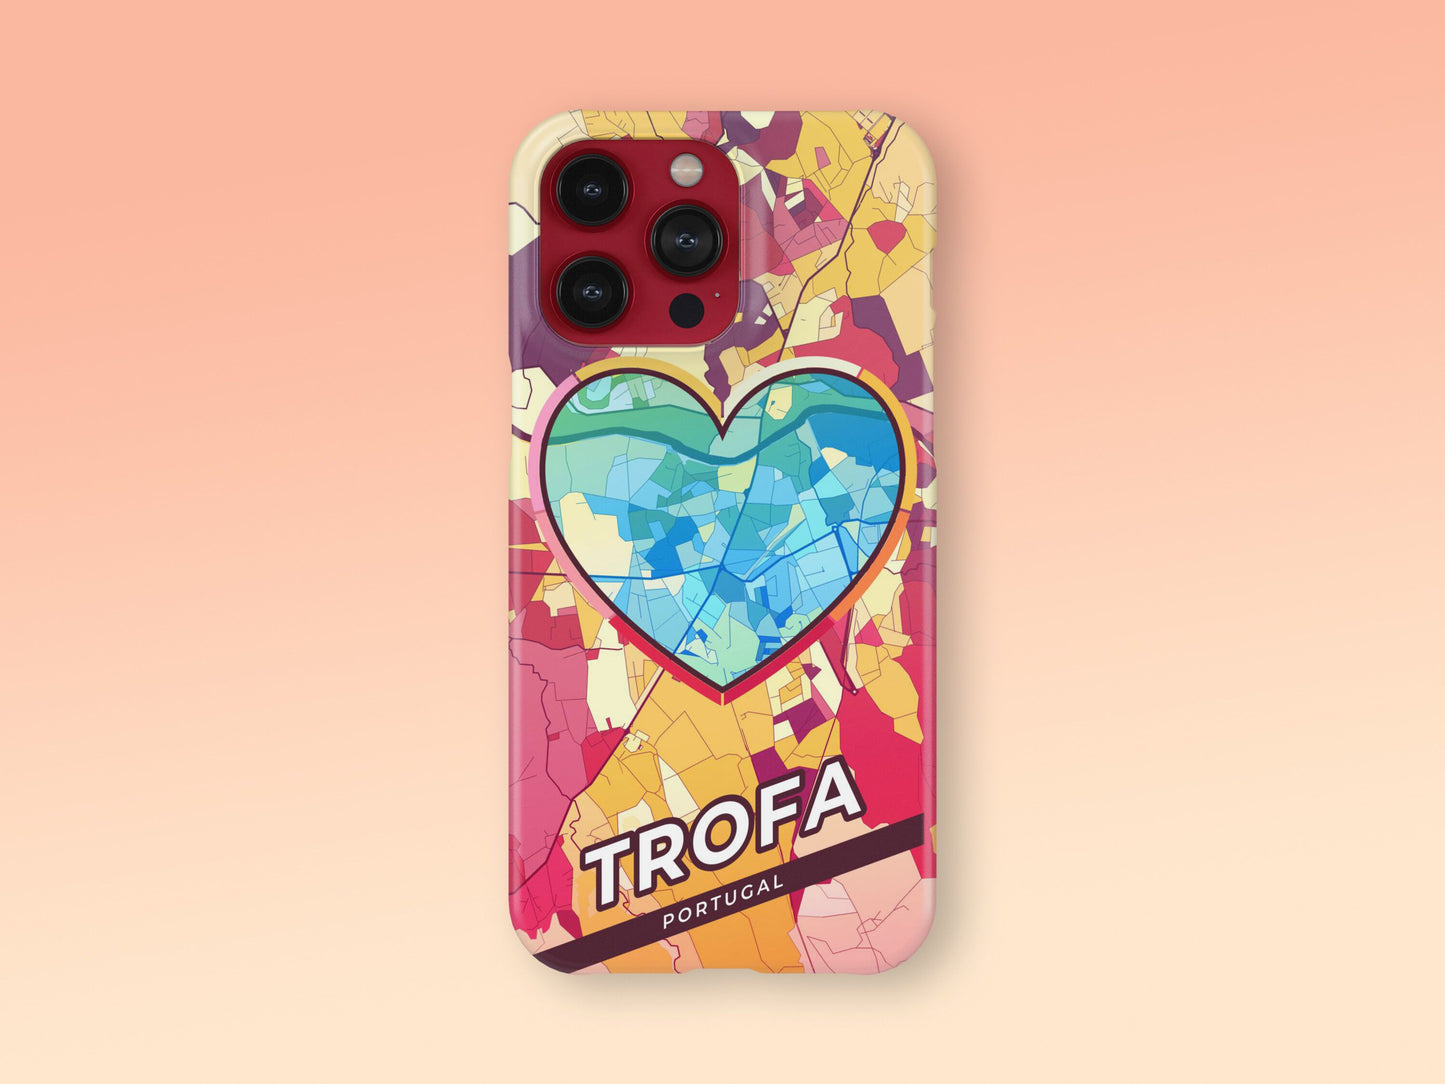 Trofa Portugal slim phone case with colorful icon 2